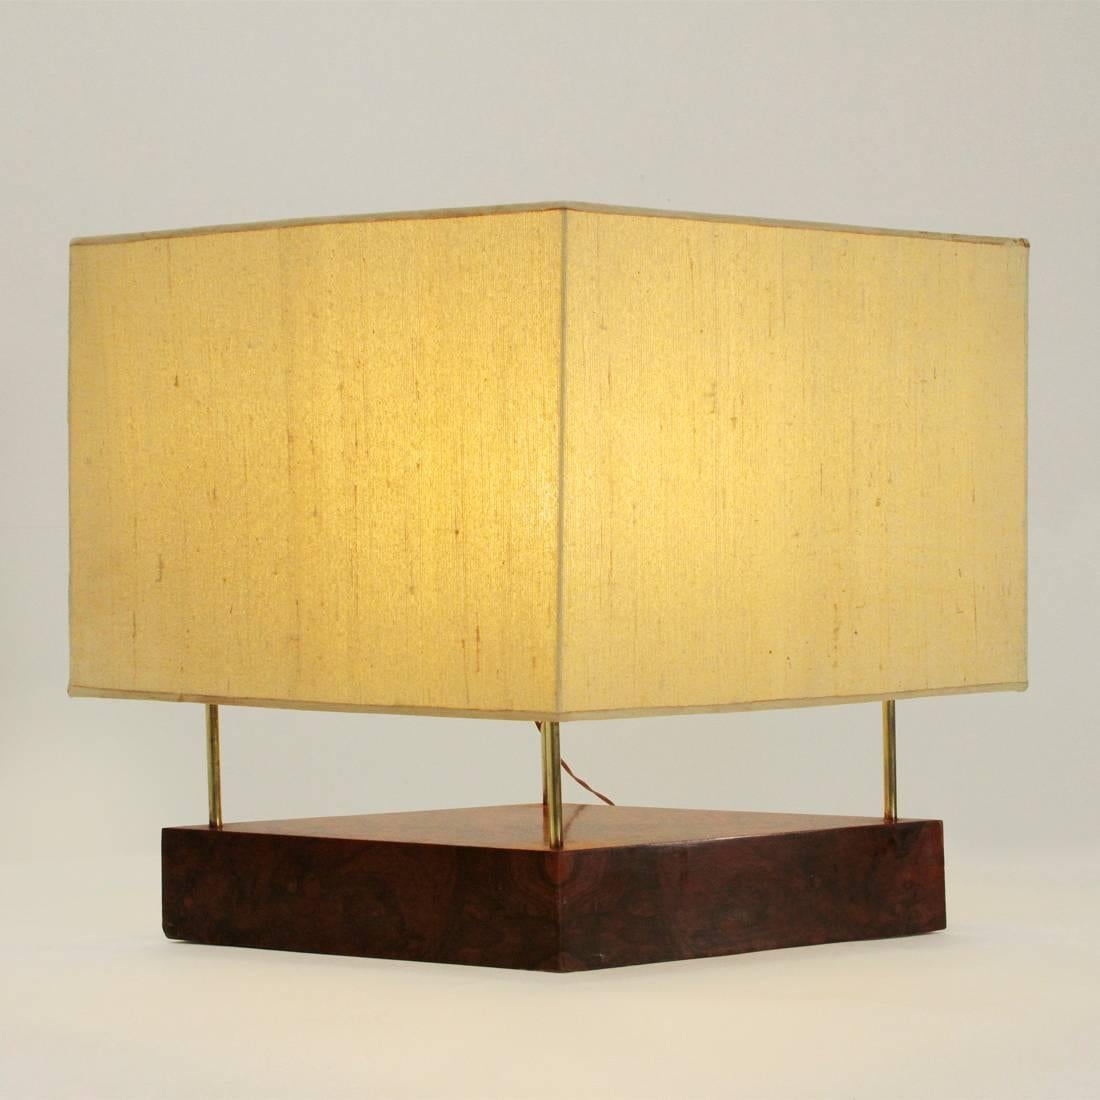 Large Italian lamp of Italian production of the 1930s.
Wooden structure of rhomboidal shape veneered in briarwood.
Four brass stems.
Diamond-shaped diffuser in metal rod covered in paper and fabric.
Good general conditions, some signs due to